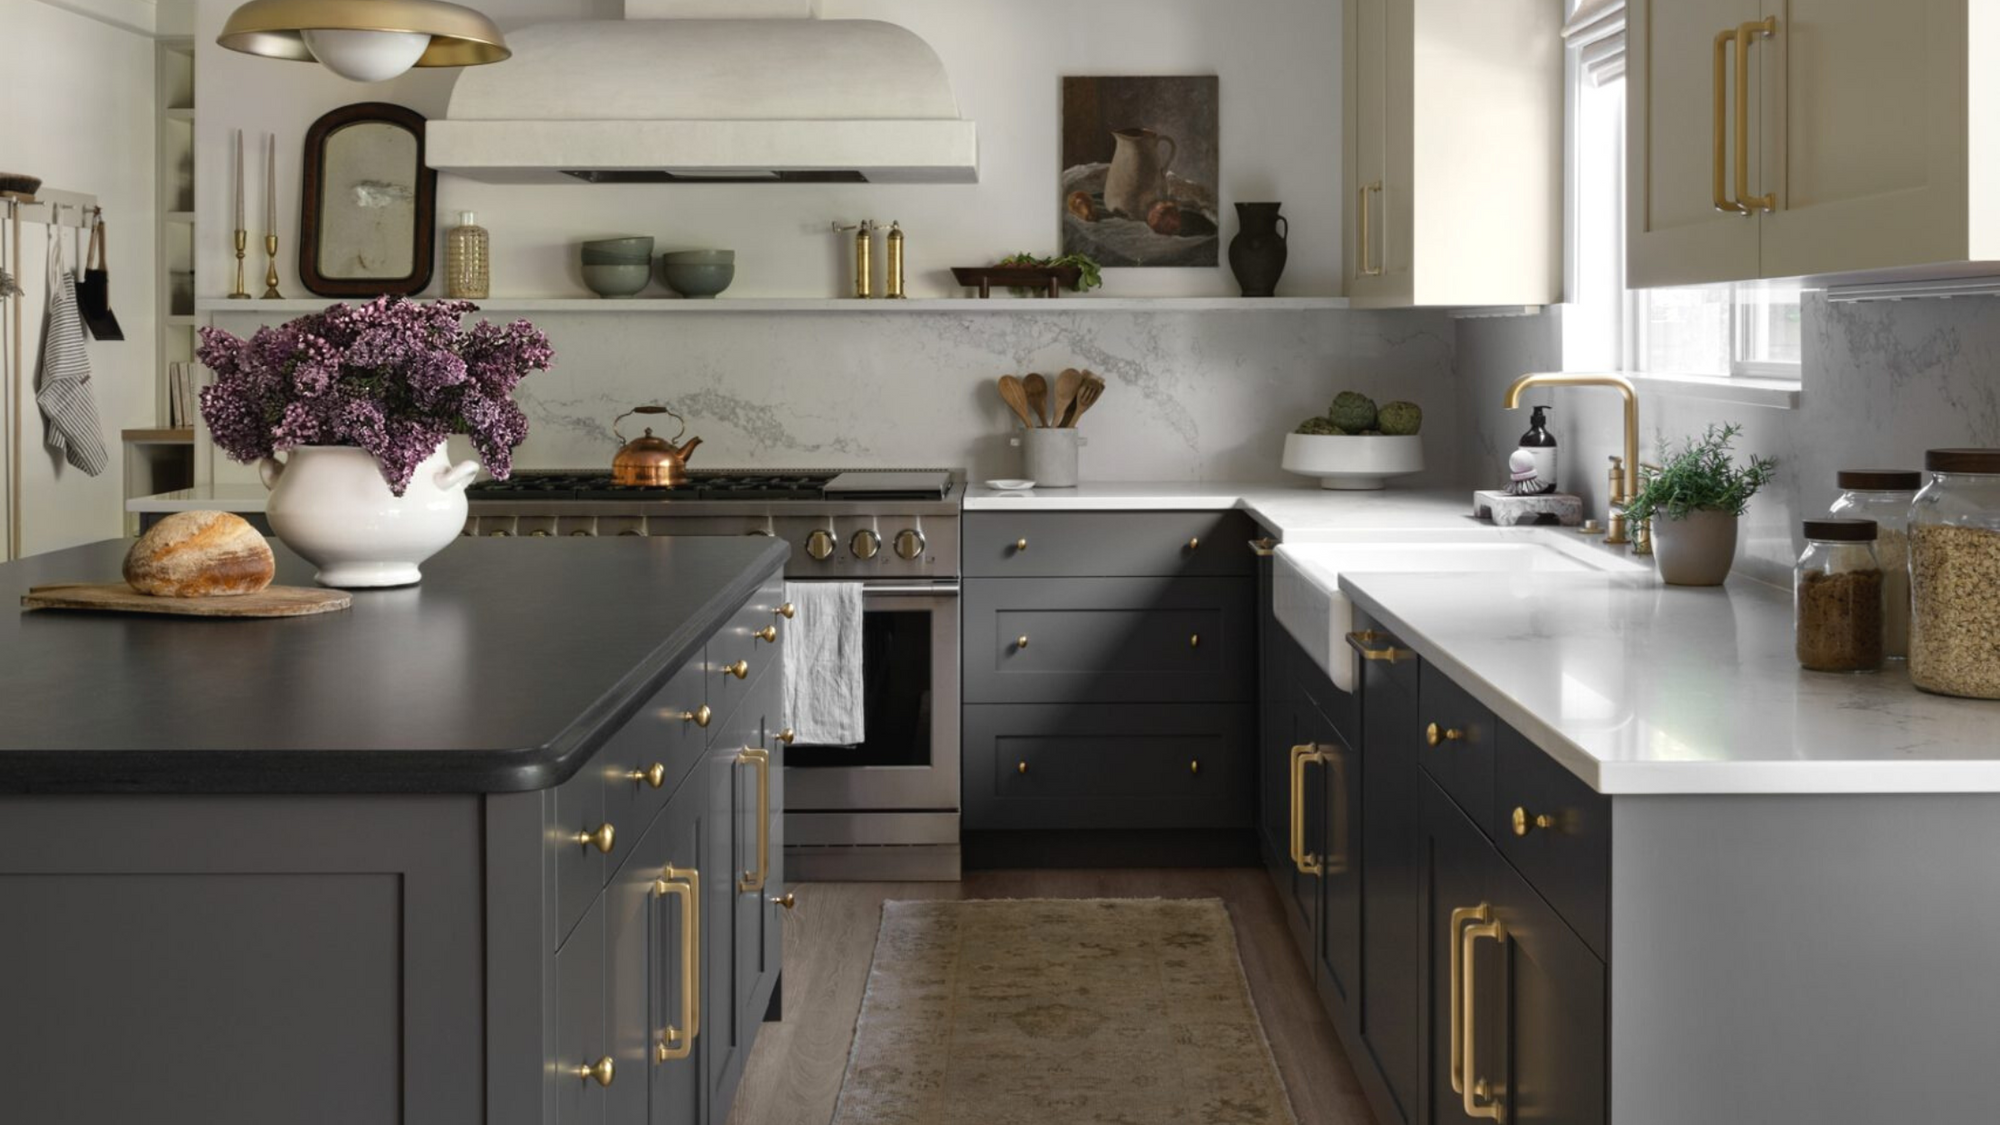 Interior Design and Decor Trends for 2023 blog post. Kitchen scene with medium dark cabinets, veined marbled countertop and backsplash, vintage decor pieces, artwork, and vases.